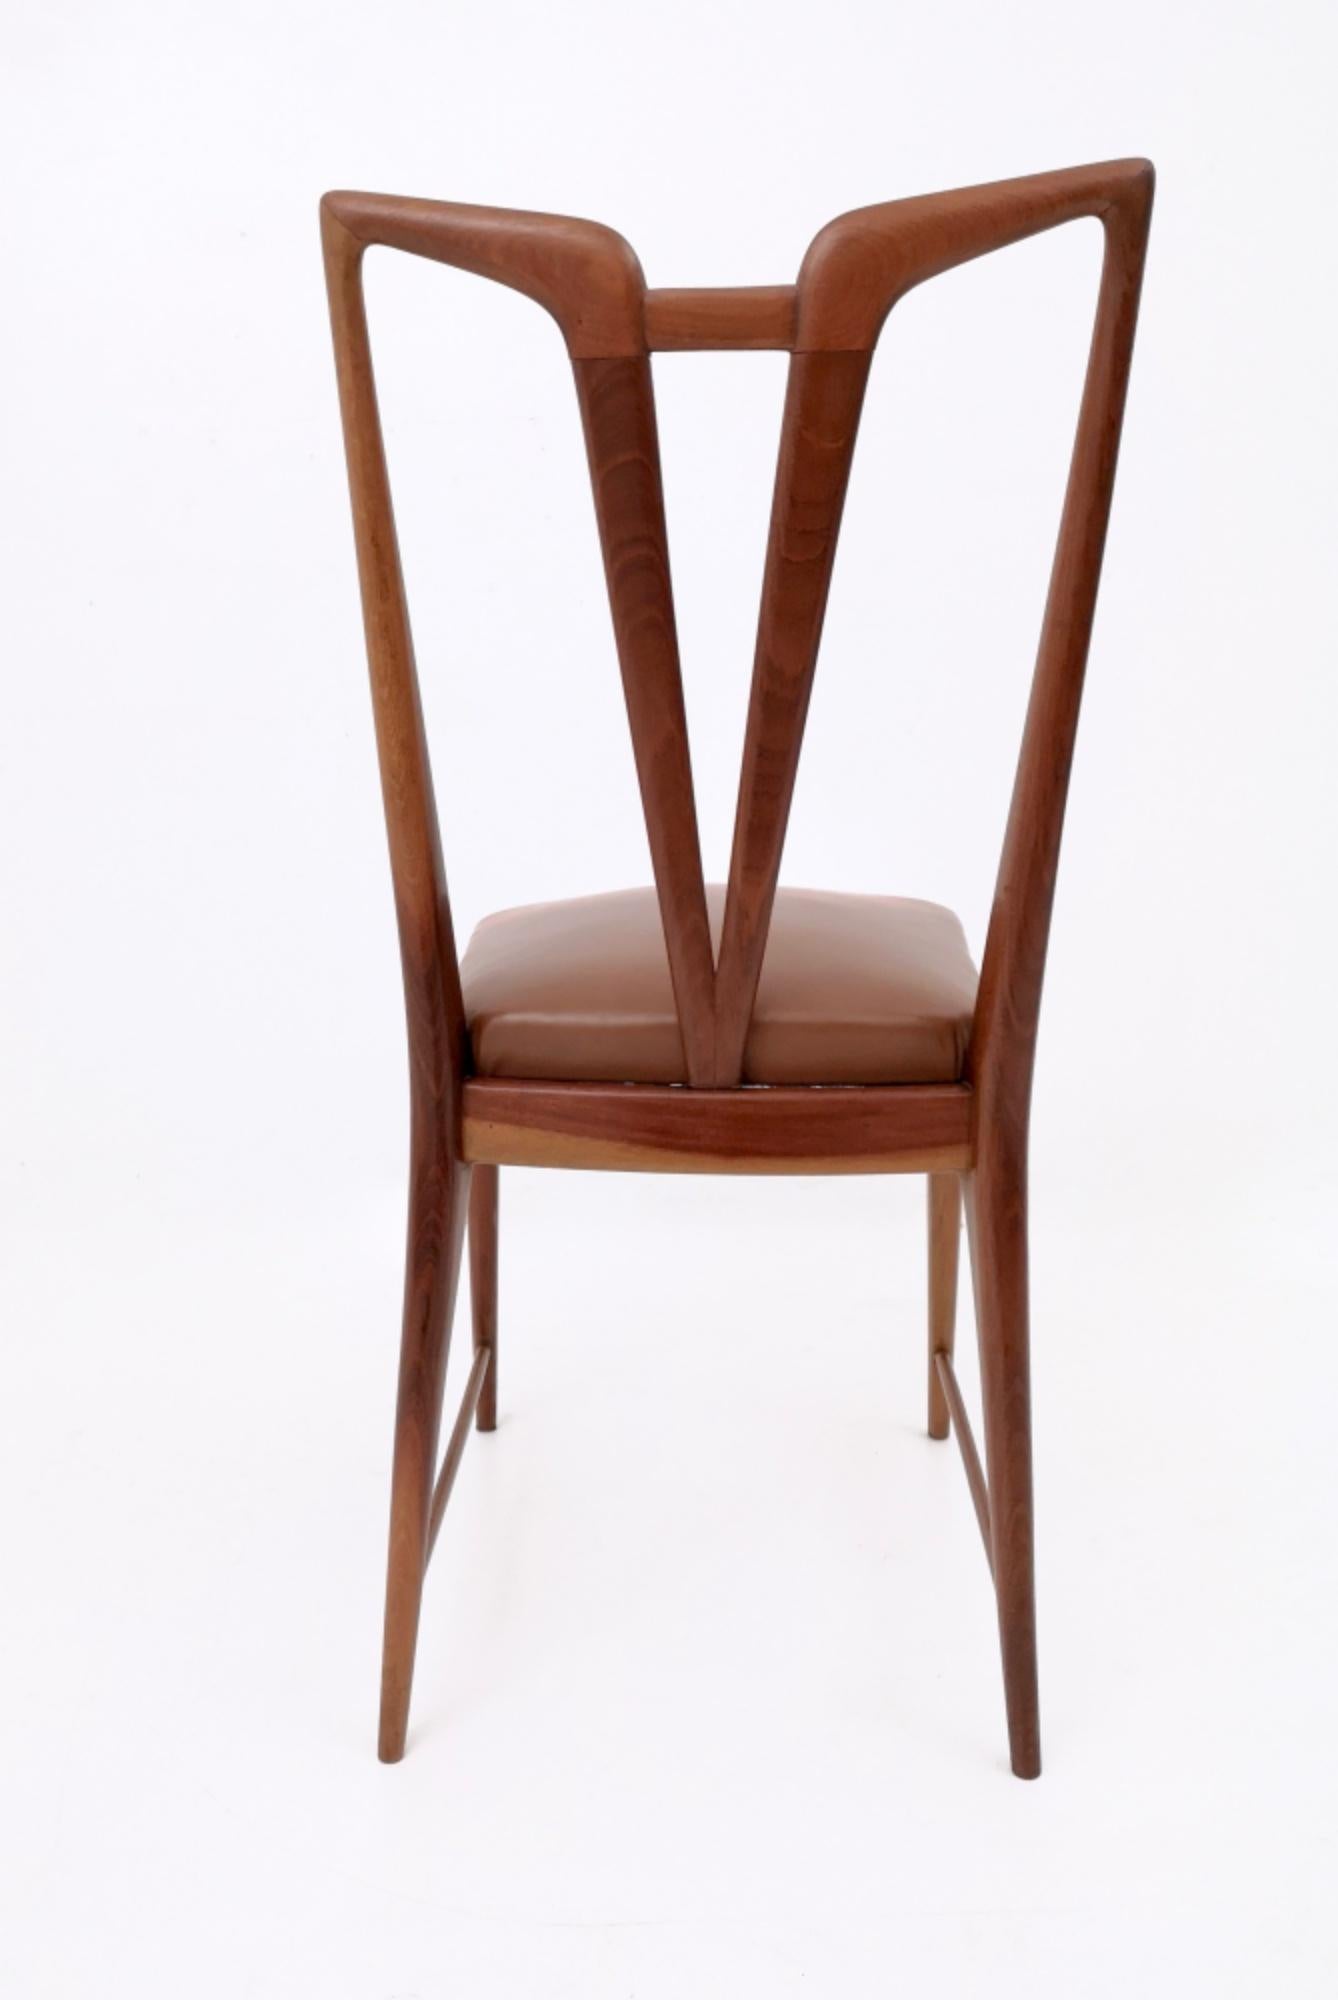 Set of Six Vintage Solid Wood Dining Chairs with Brown Skai Upholstery, Italy 1